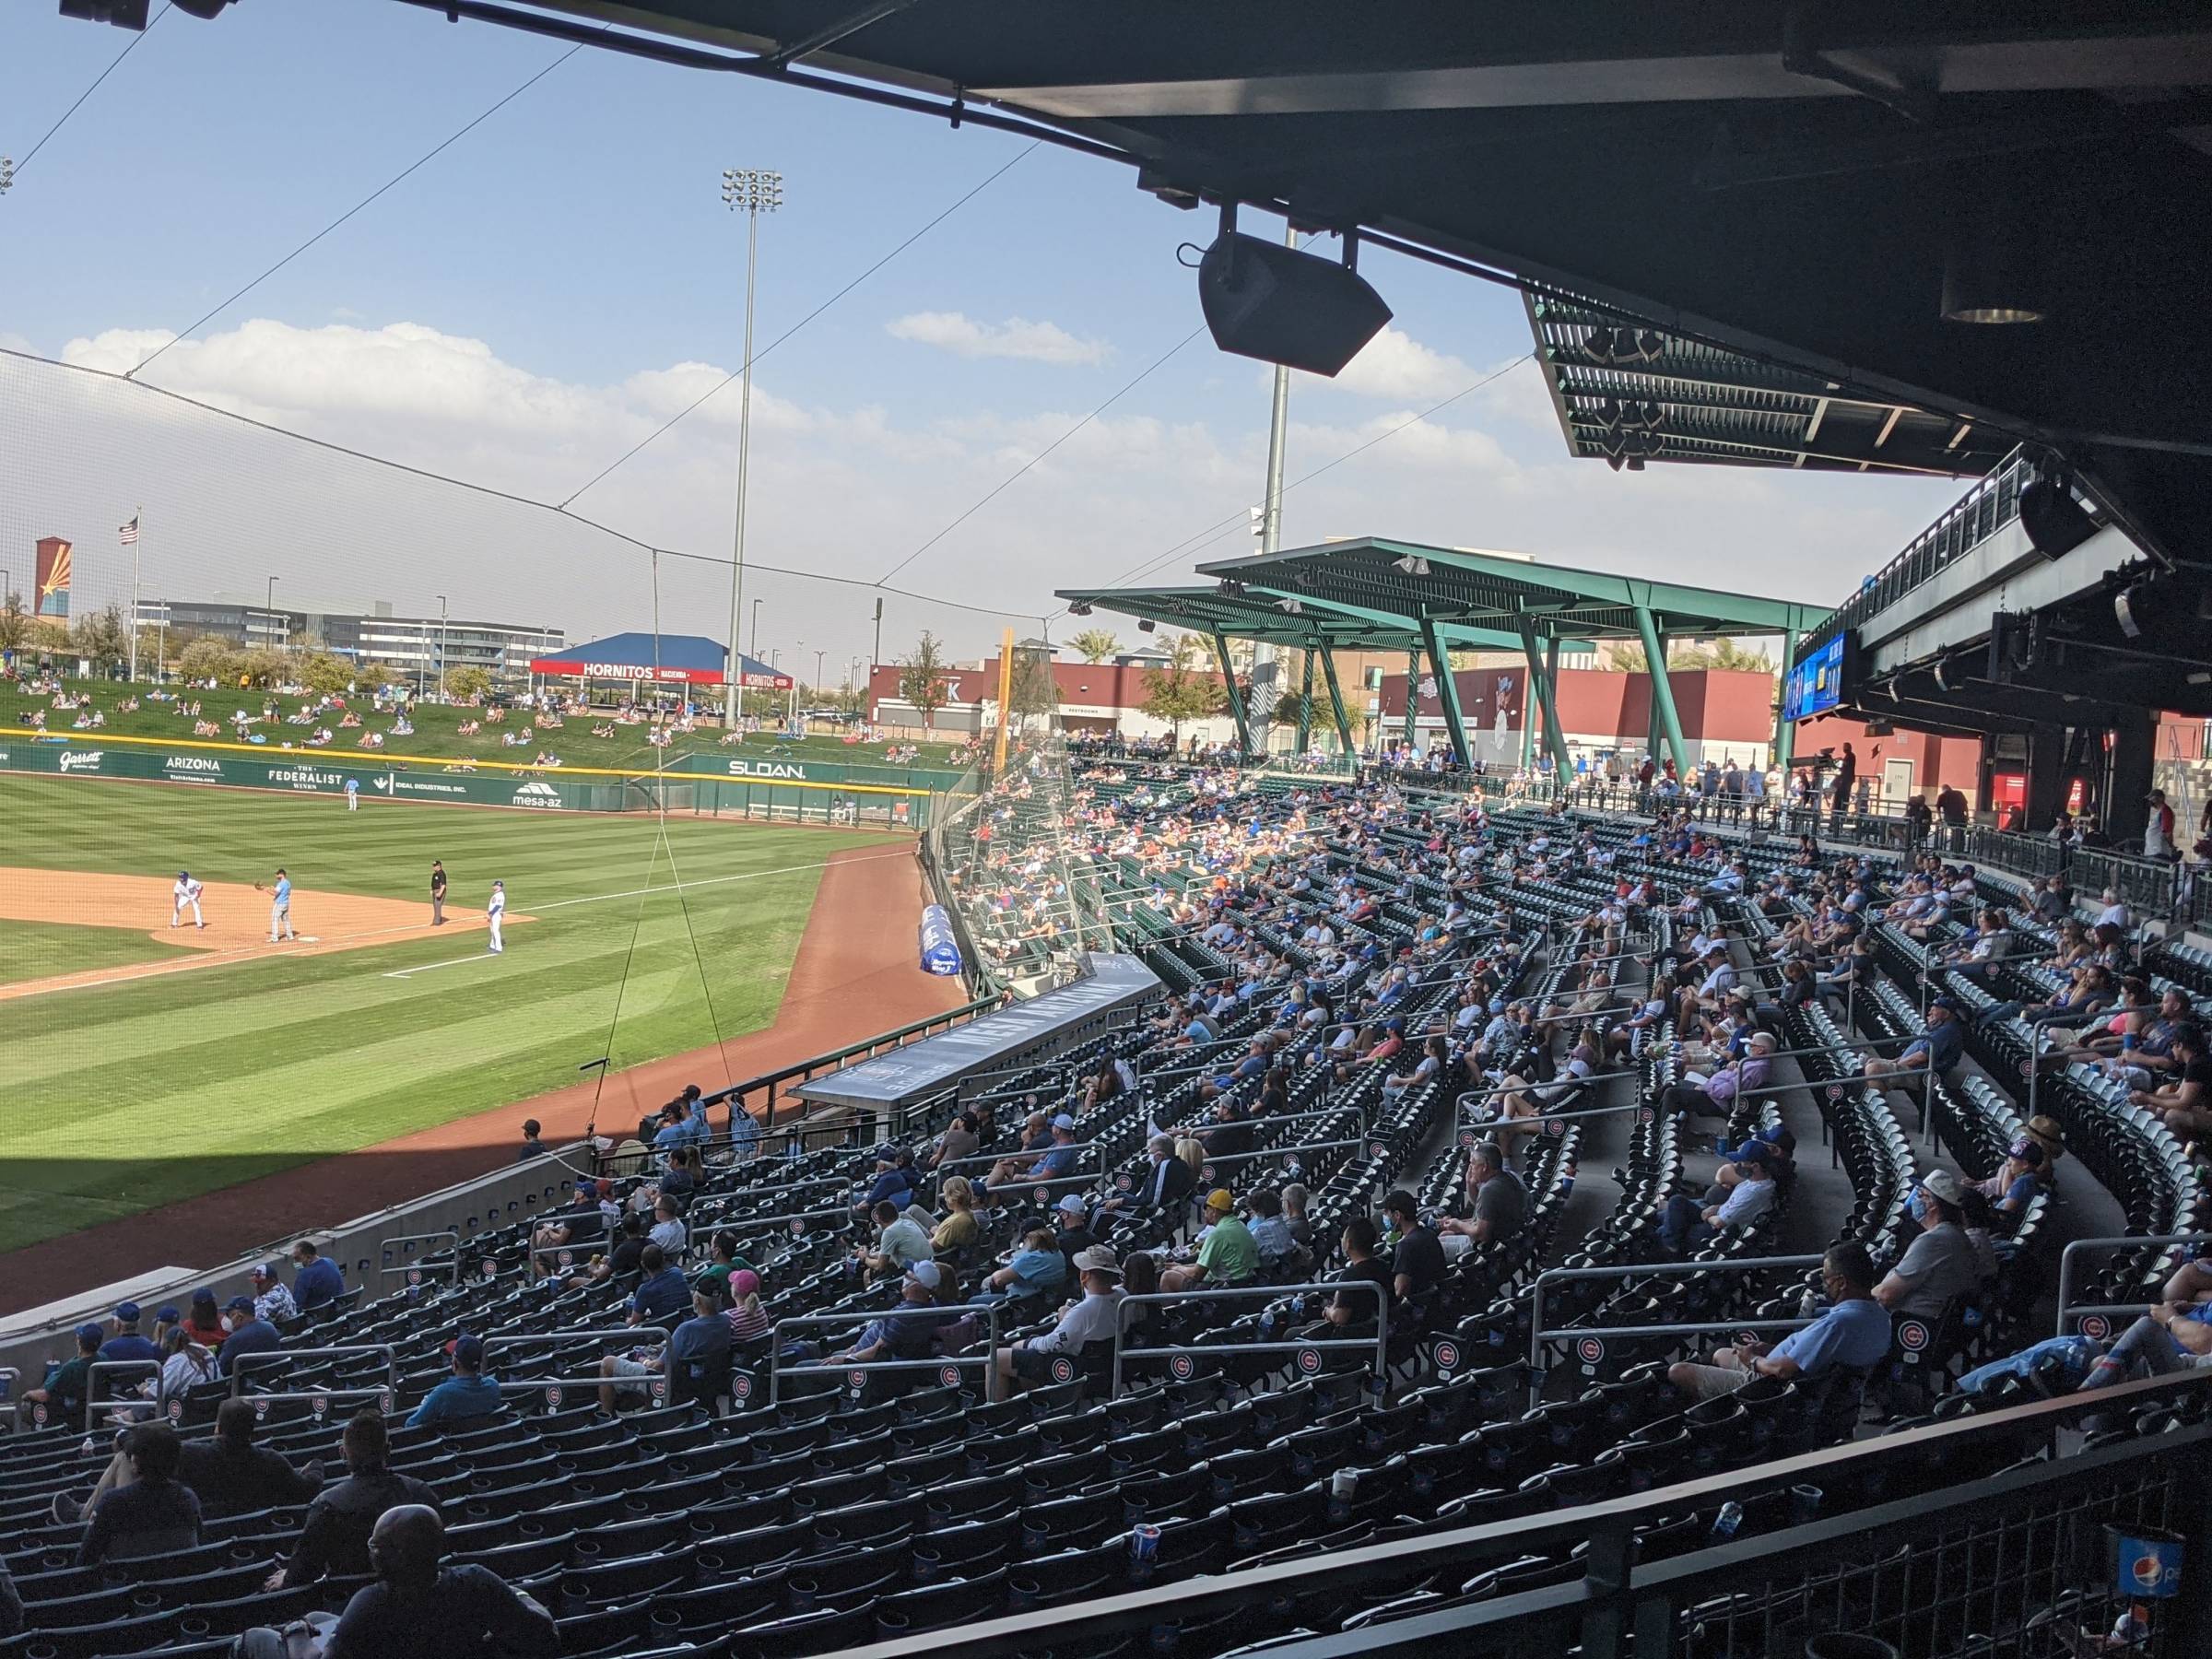 Section 105 at Sloan Park 